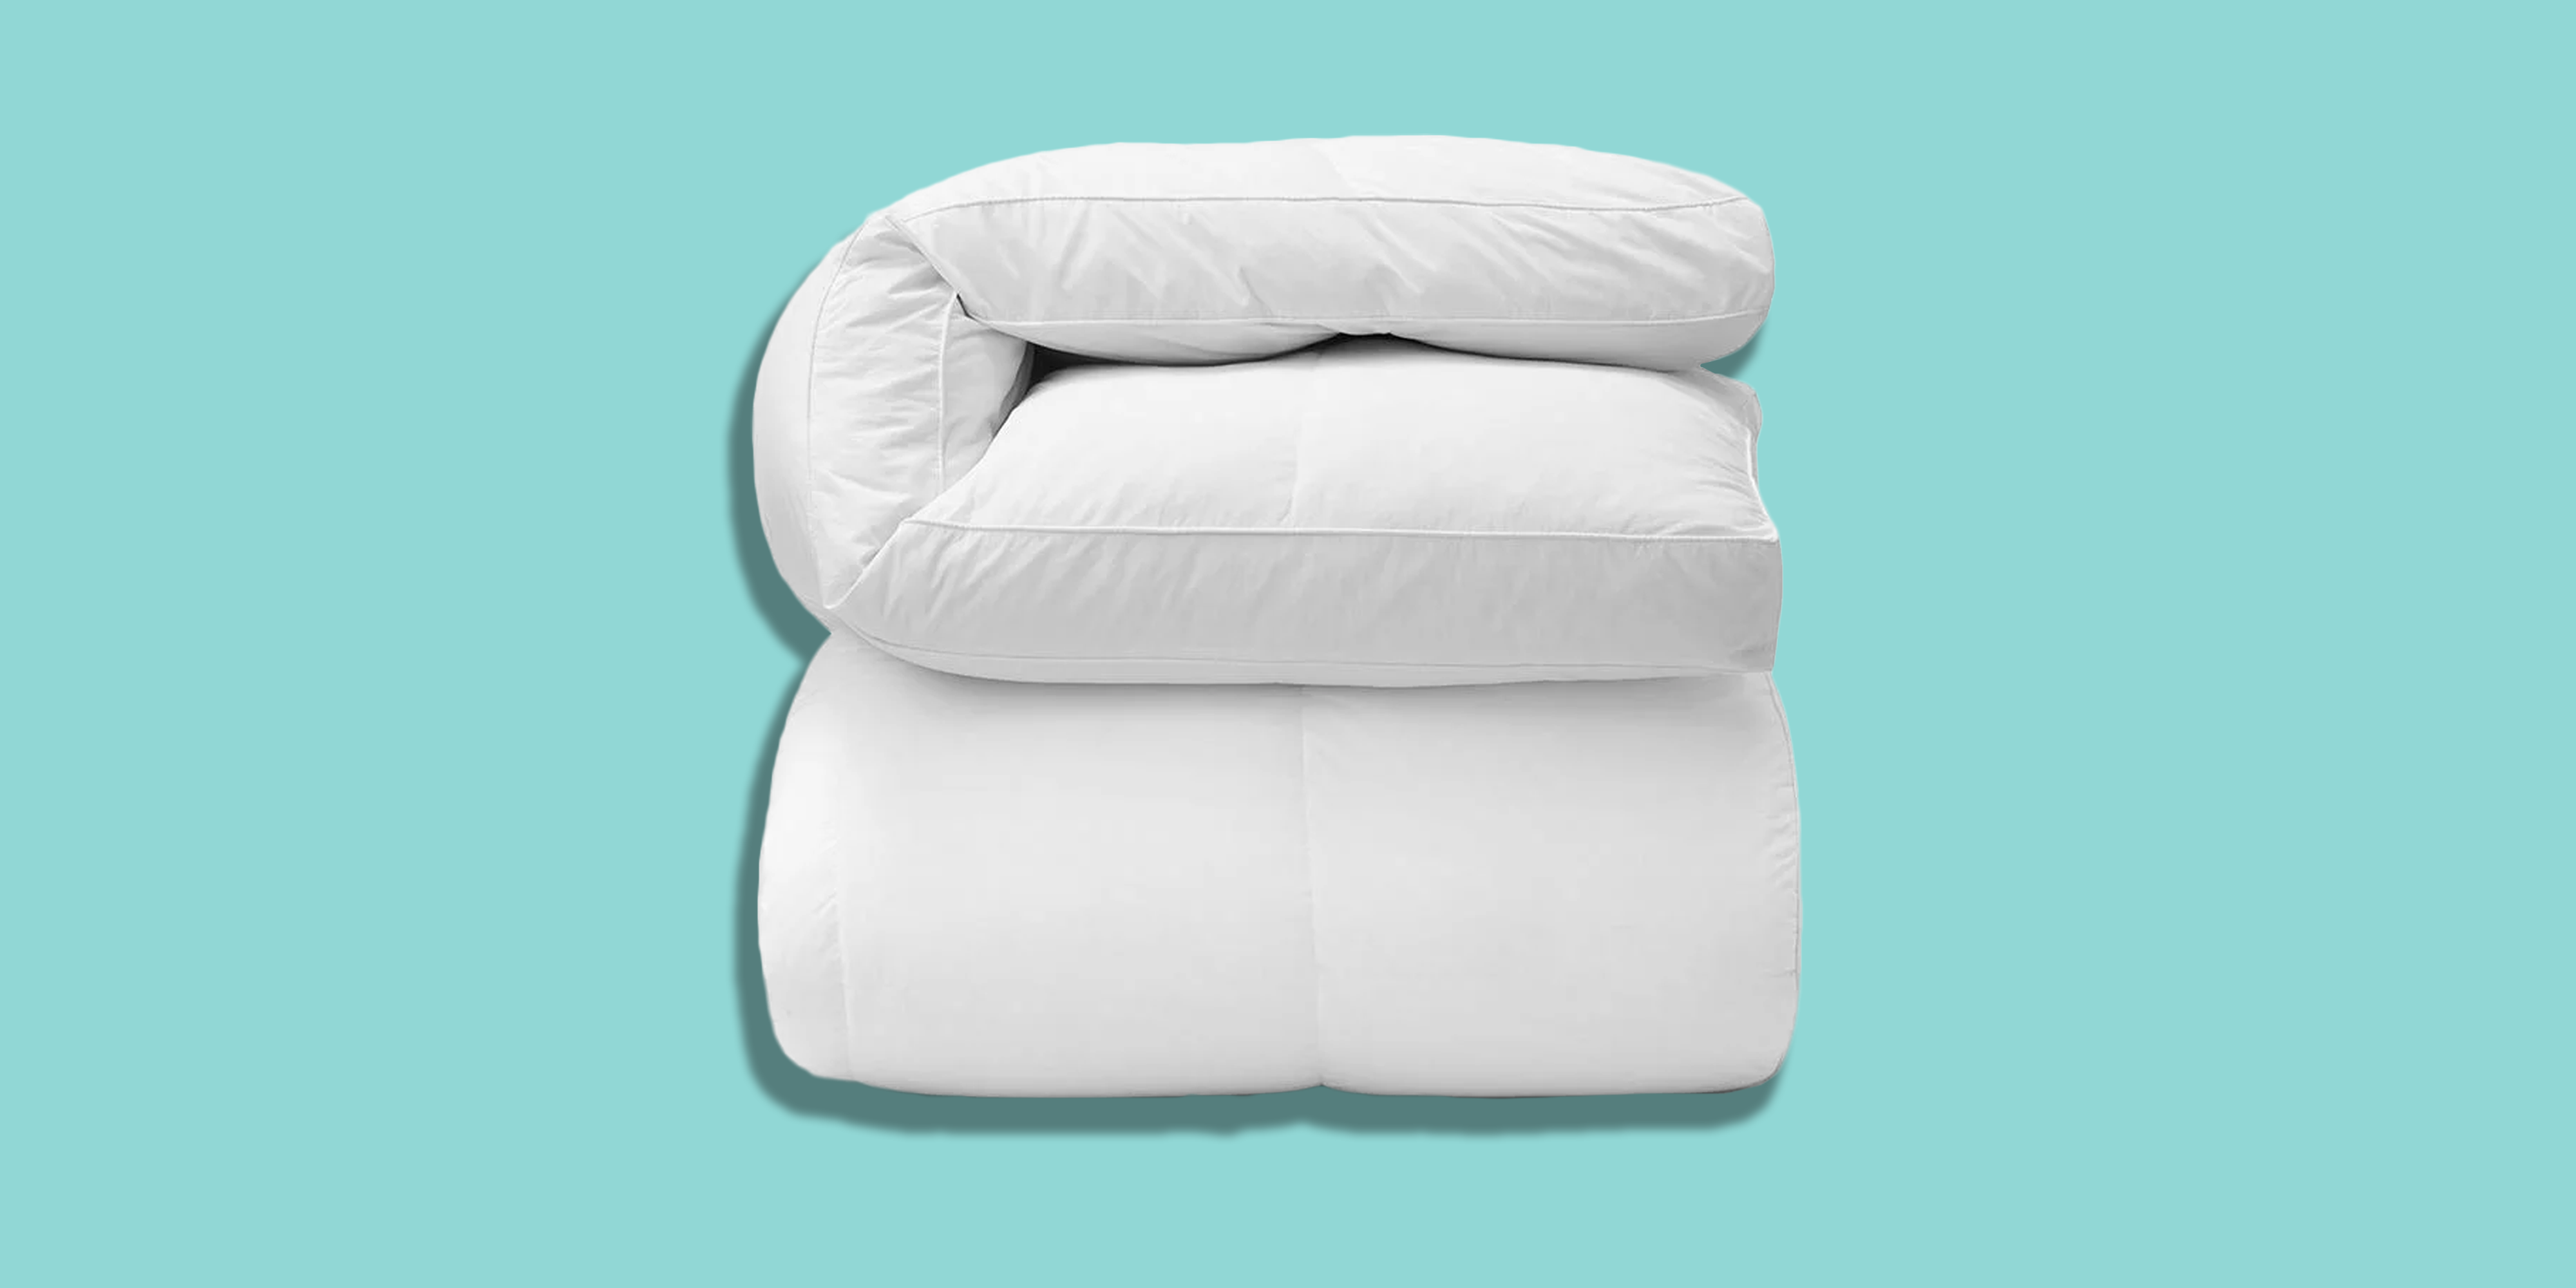 Best foldable mattresses: Top 10 picks for ultimate comfort and convenience